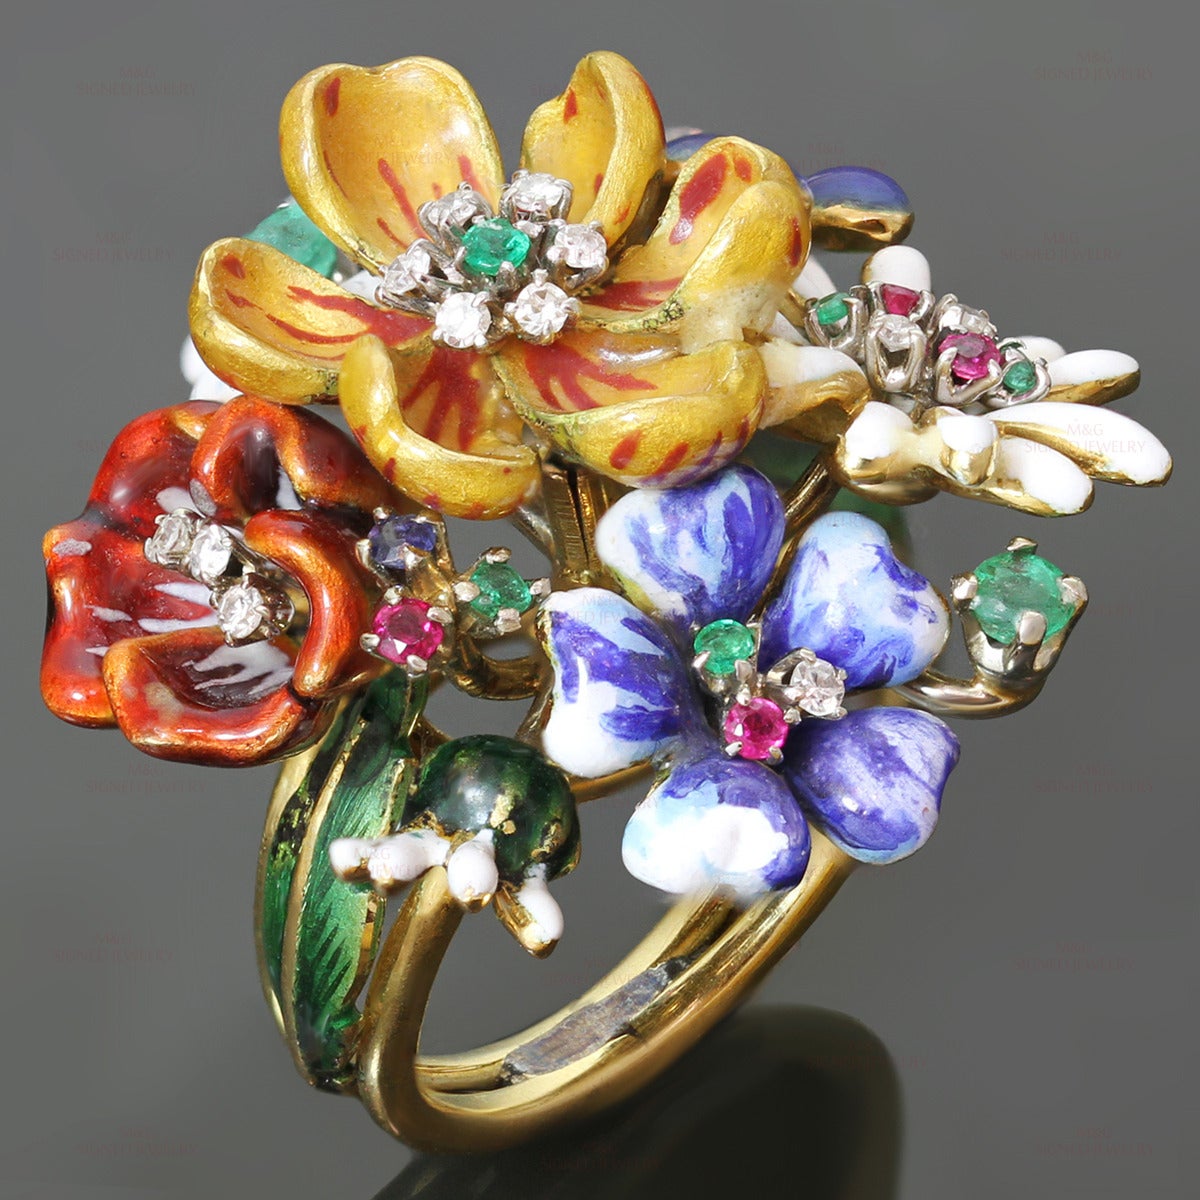 This exquisite hand-crafted ring features a colorful enamel bouquet of wild flowers, made in 18k yellow gold and prong-set with sparkling diamonds, rubies, and emeralds. The H-I VS2-SI1 diamonds weigh an estimated 0.30 carats and the faceted